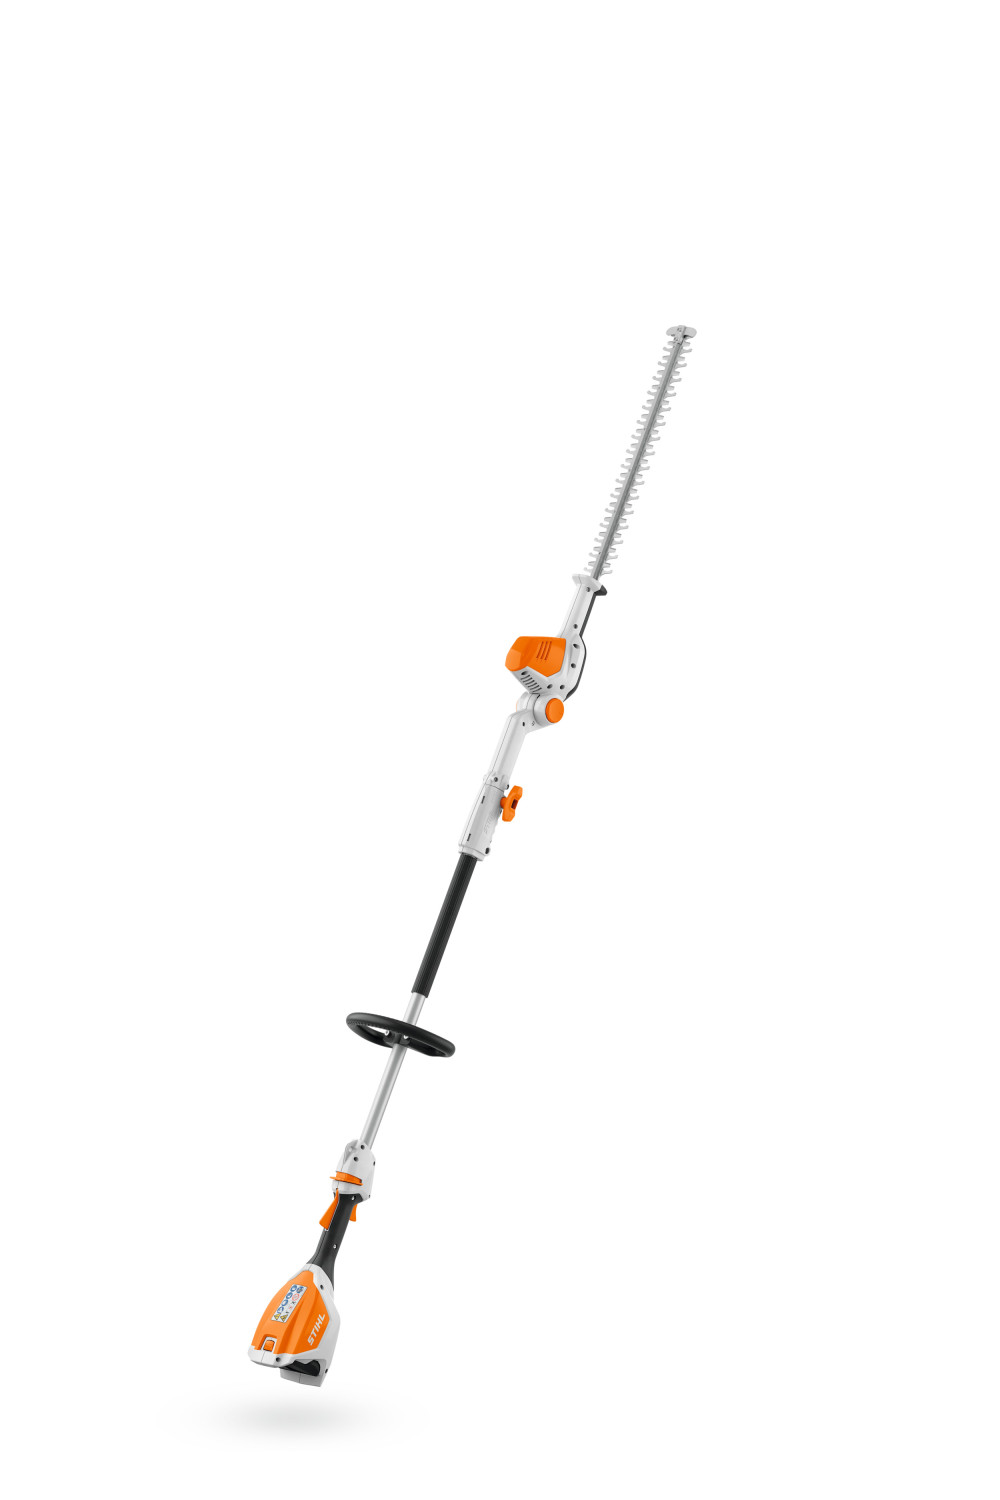 STIHL HLA 56 Battery Long-Reach Hedge Trimmer featured image